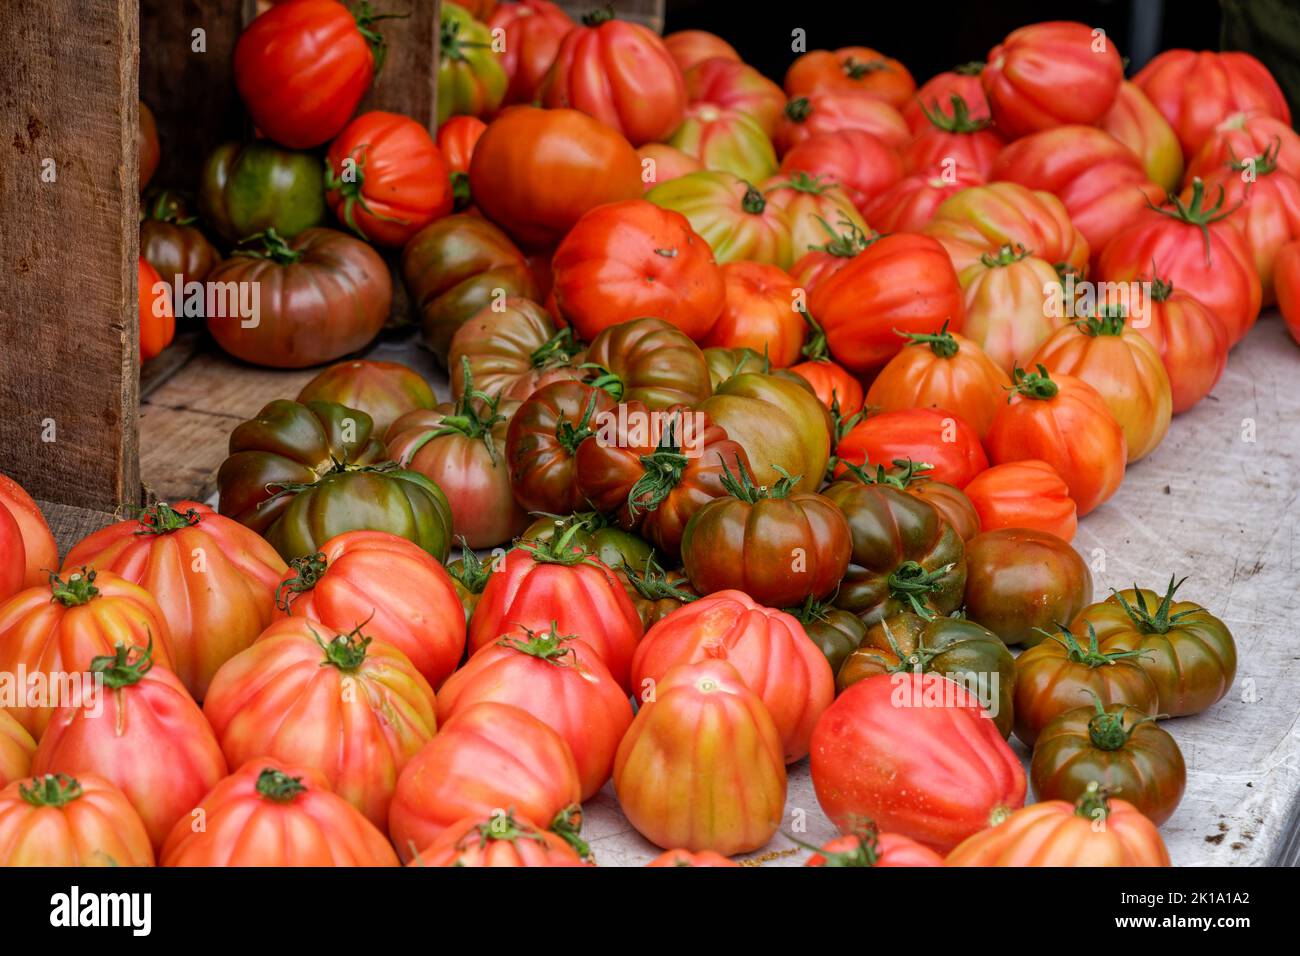 selective focus on heirloom or heritage tomatoes at the farmers market Stock Photo